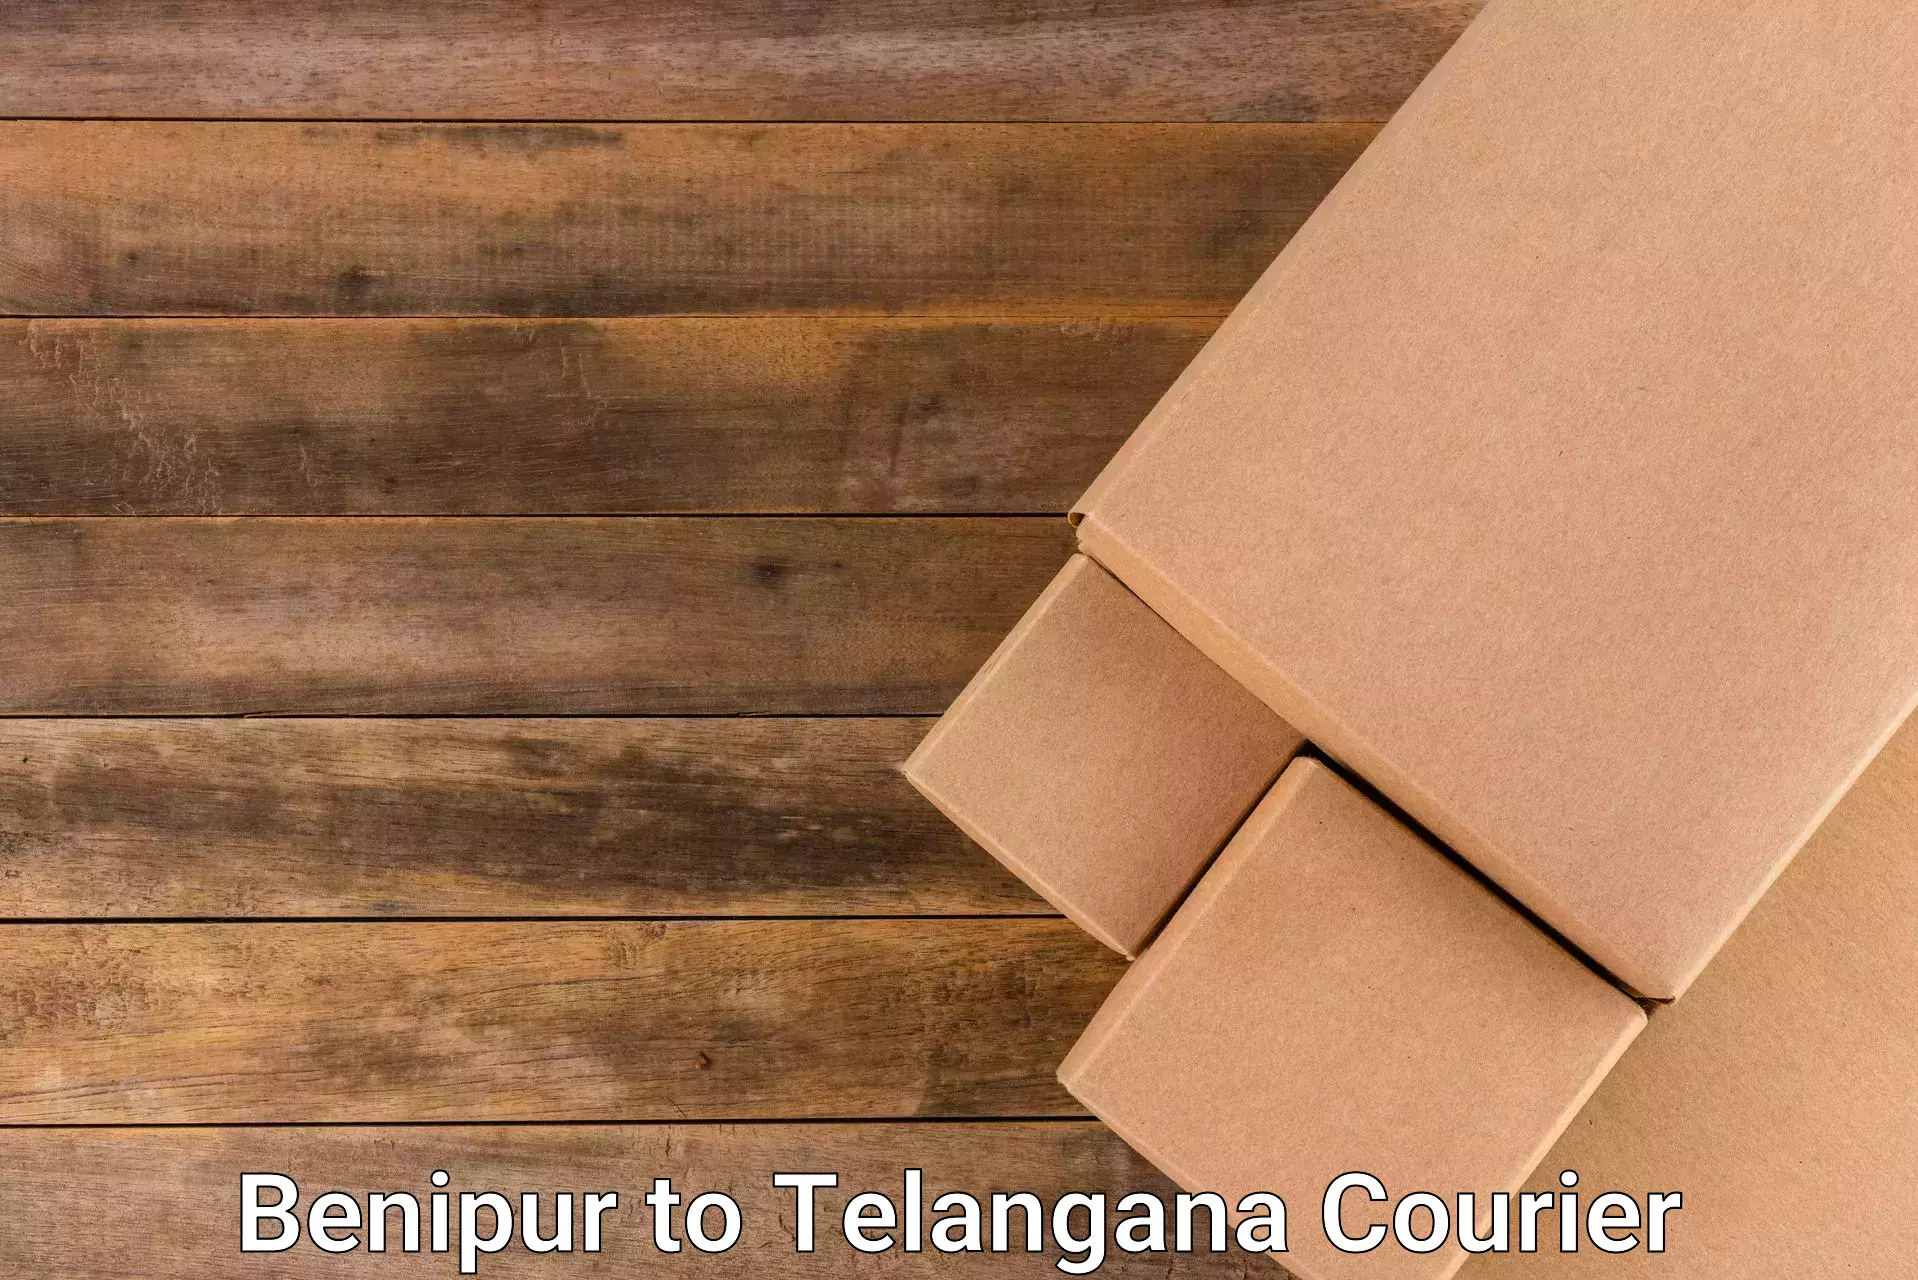 Reliable delivery network in Benipur to Achampet